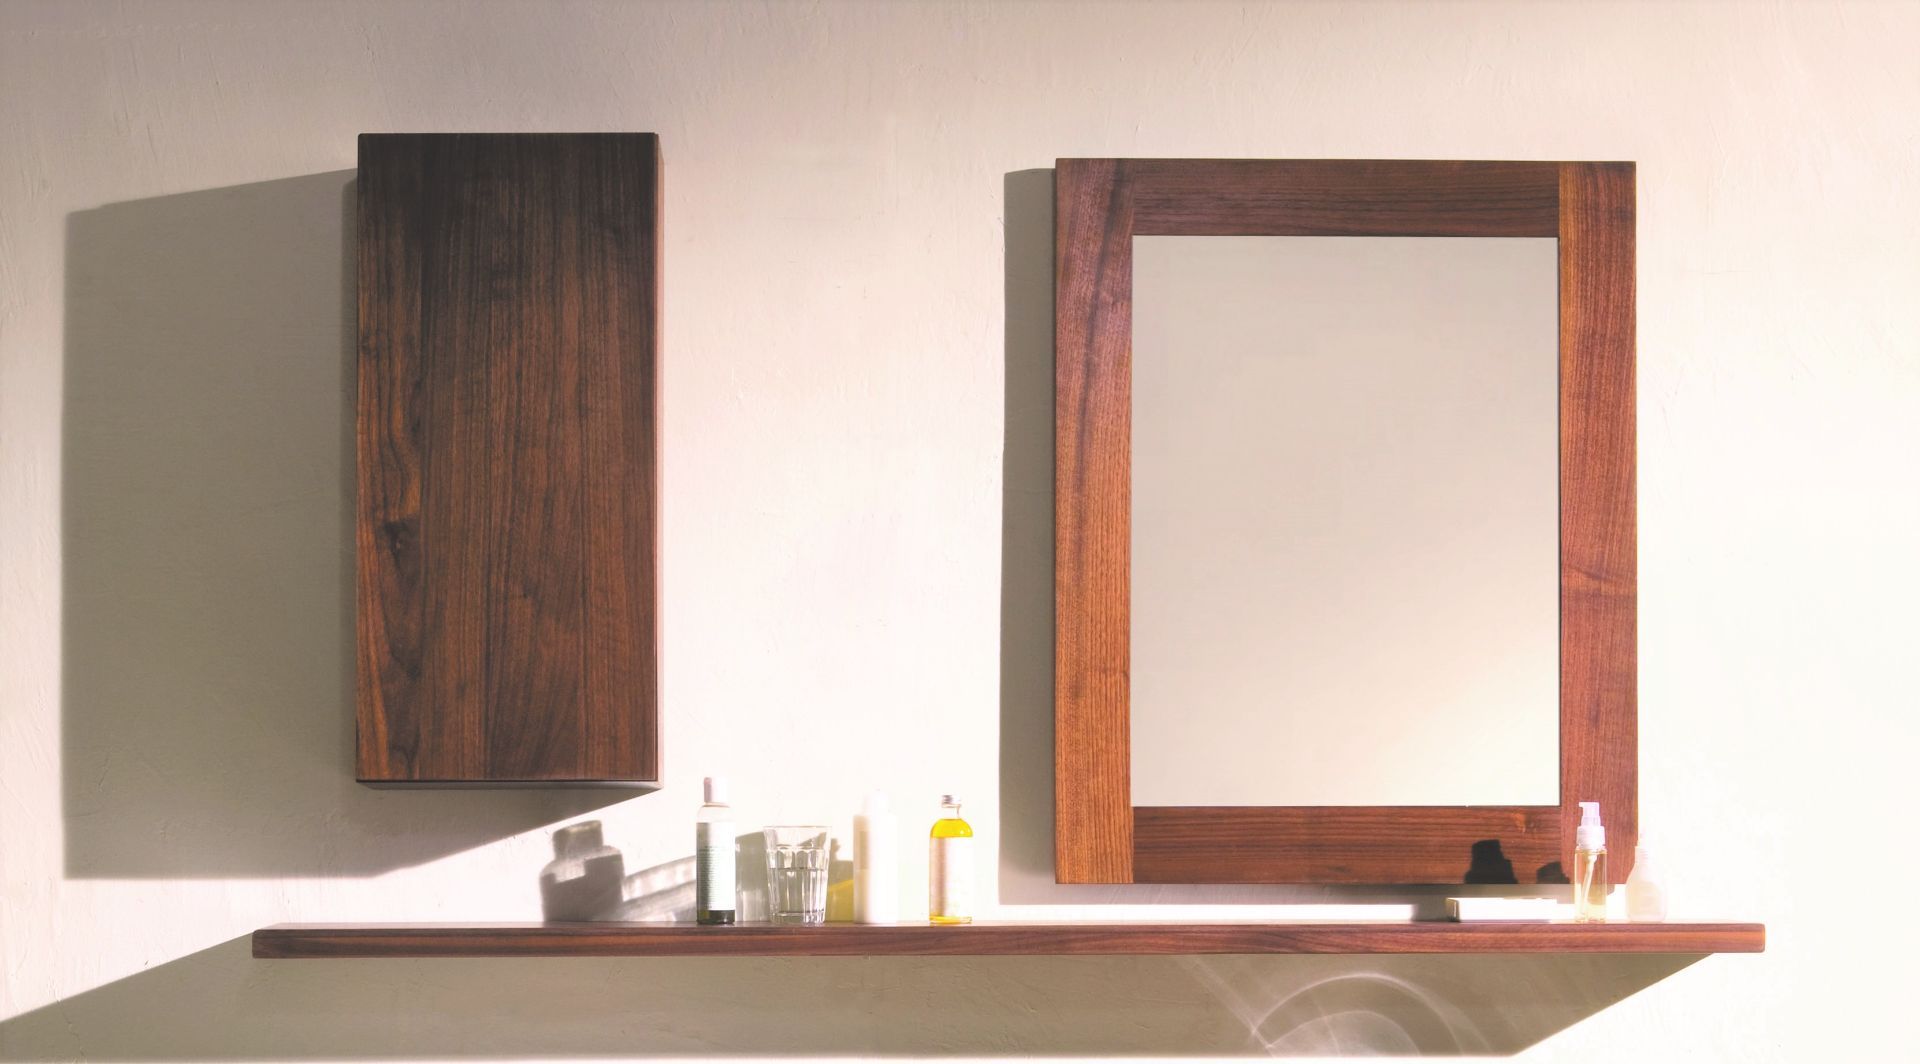 1 x Stonearth 300mm Wall Mounted Bathroom Storage Cabinet - American Solid Walnut - RRP £300 - Image 3 of 12